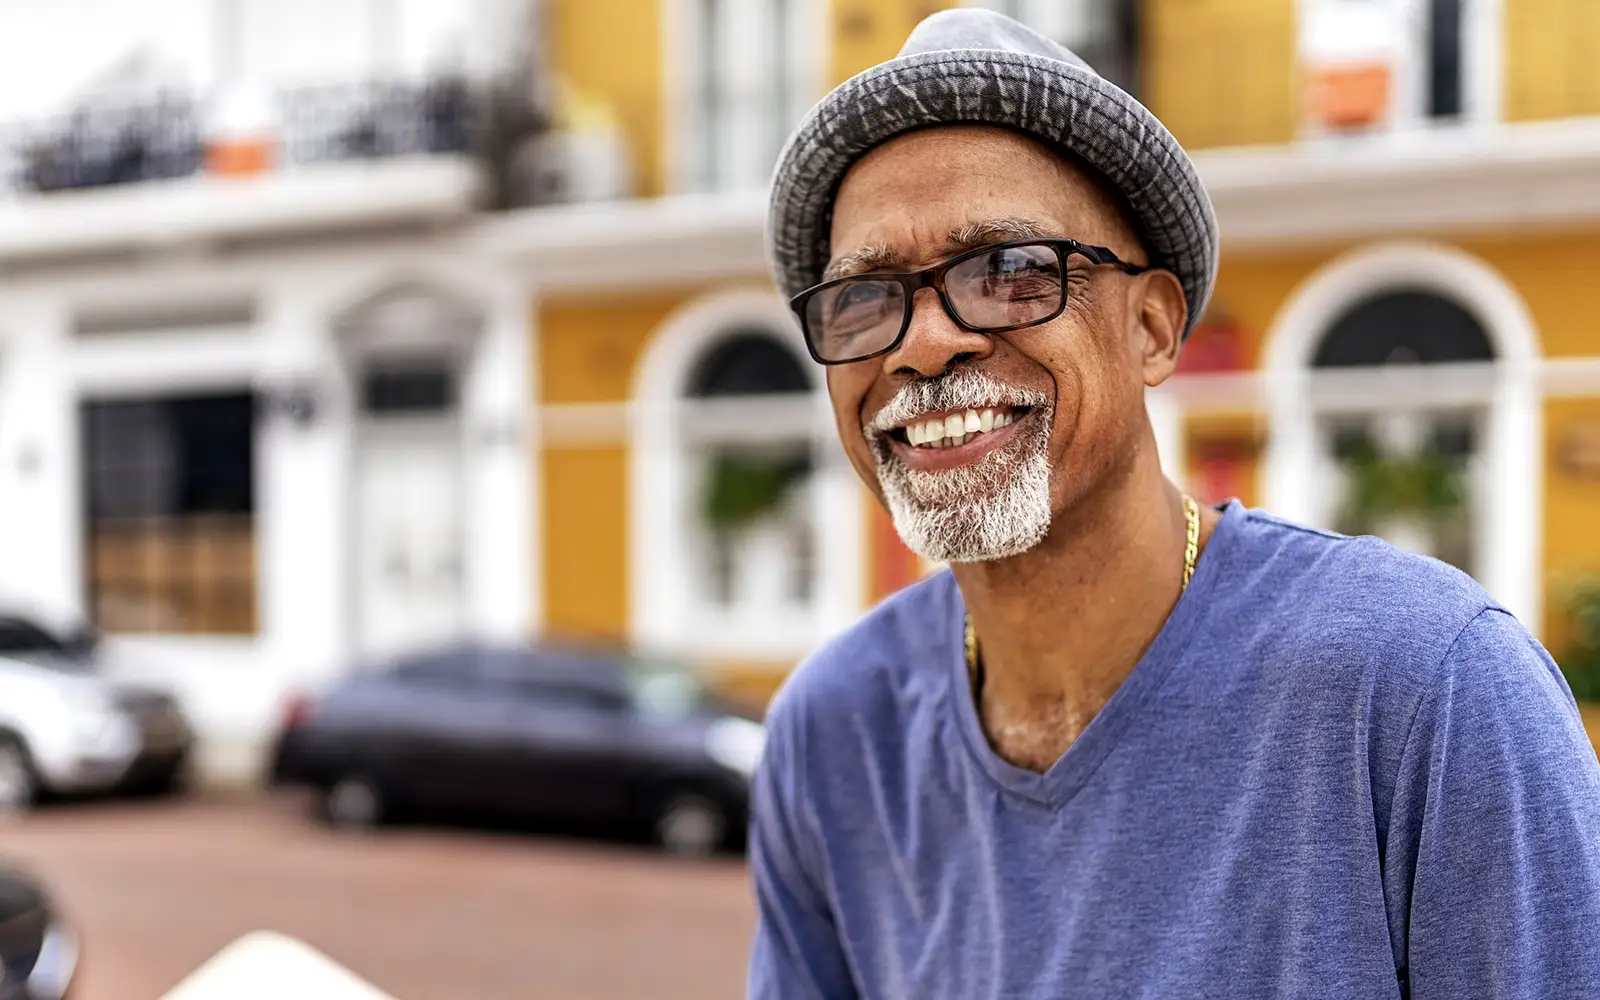 man with glasses smiling 1600x1000.webp